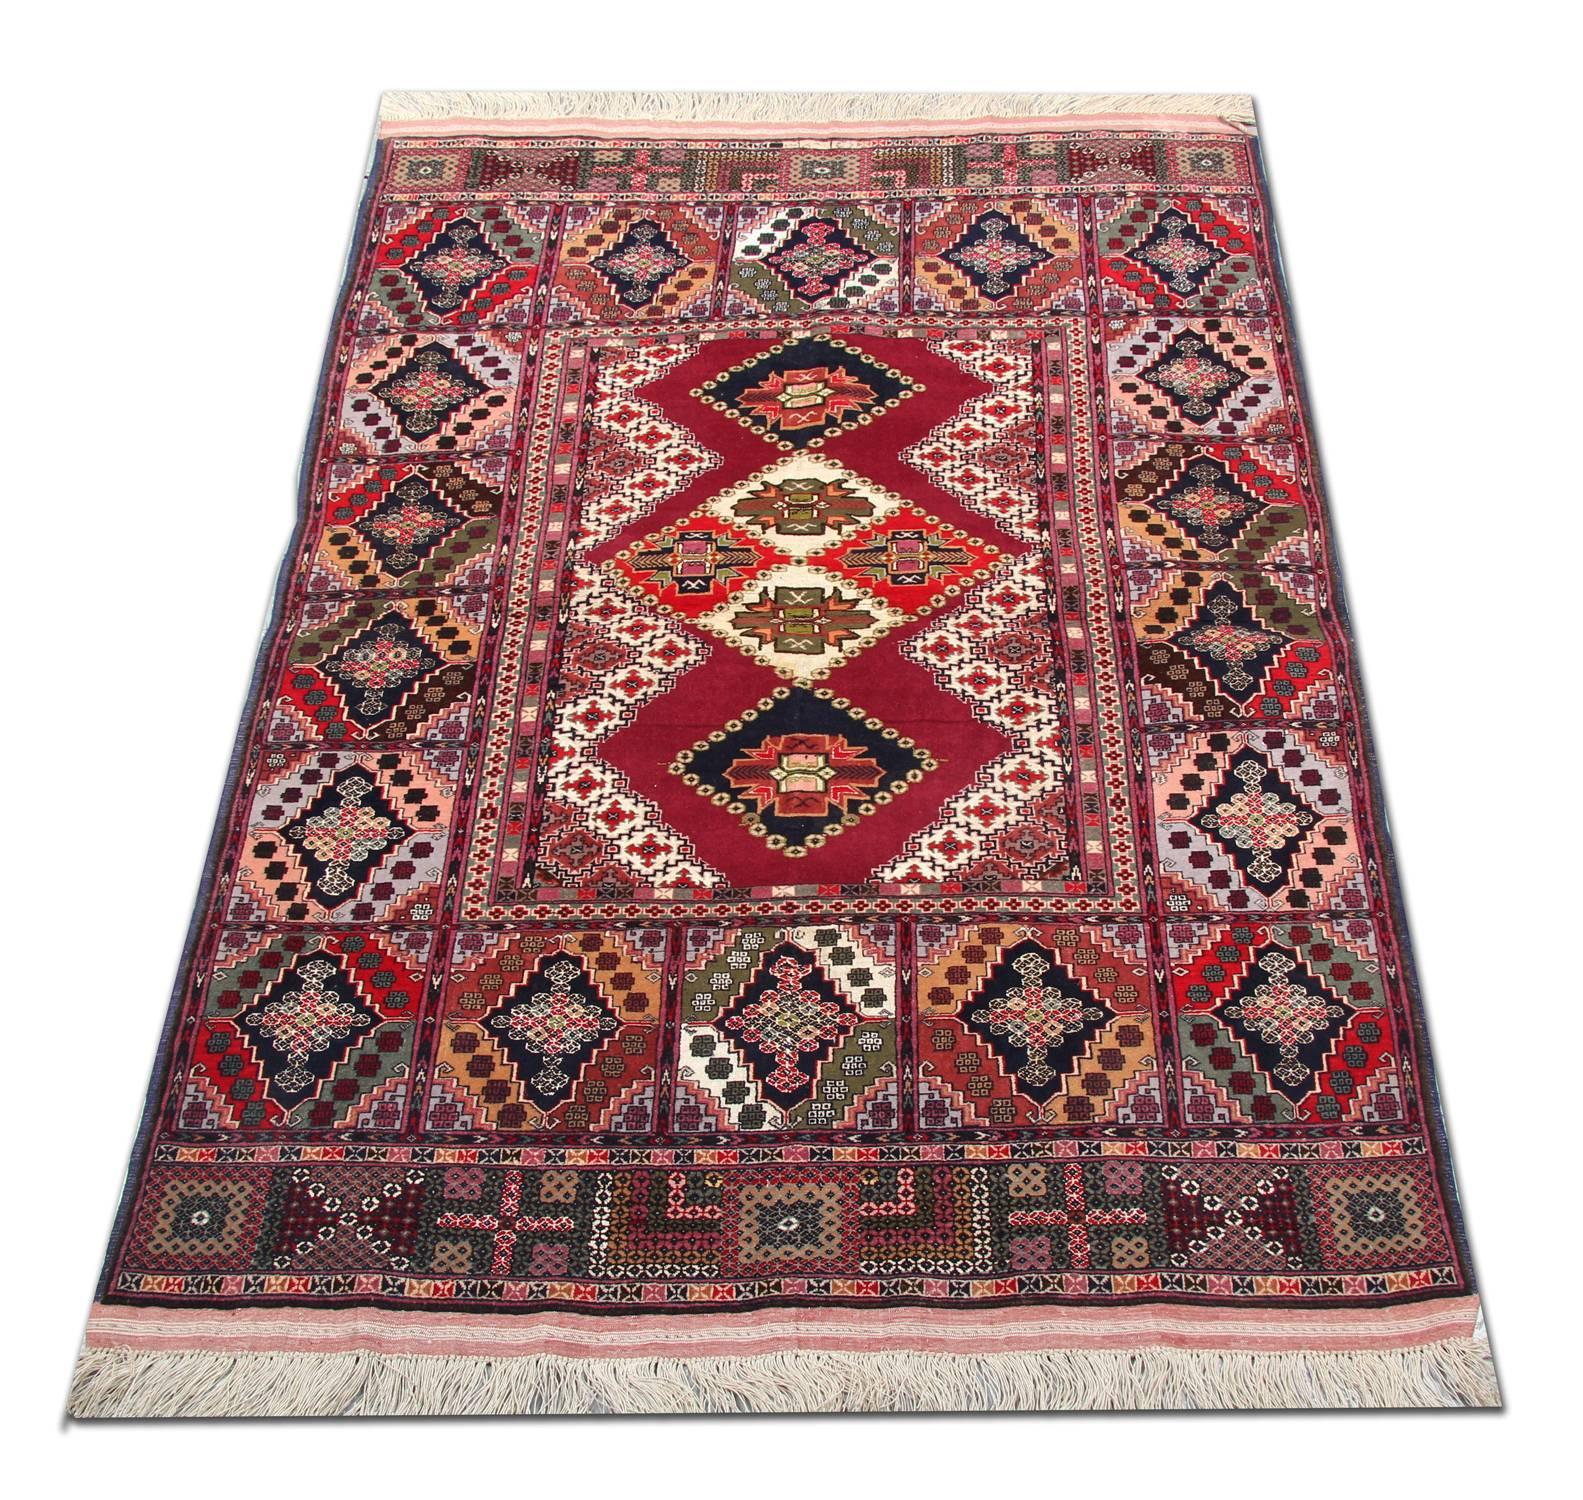 This geometric wool area rug was woven by hand with a fantastic tribal village design. The central pattern features a rich red background with diamond medallions which have been incorporated in accents of red, cream and deep blue. This is then